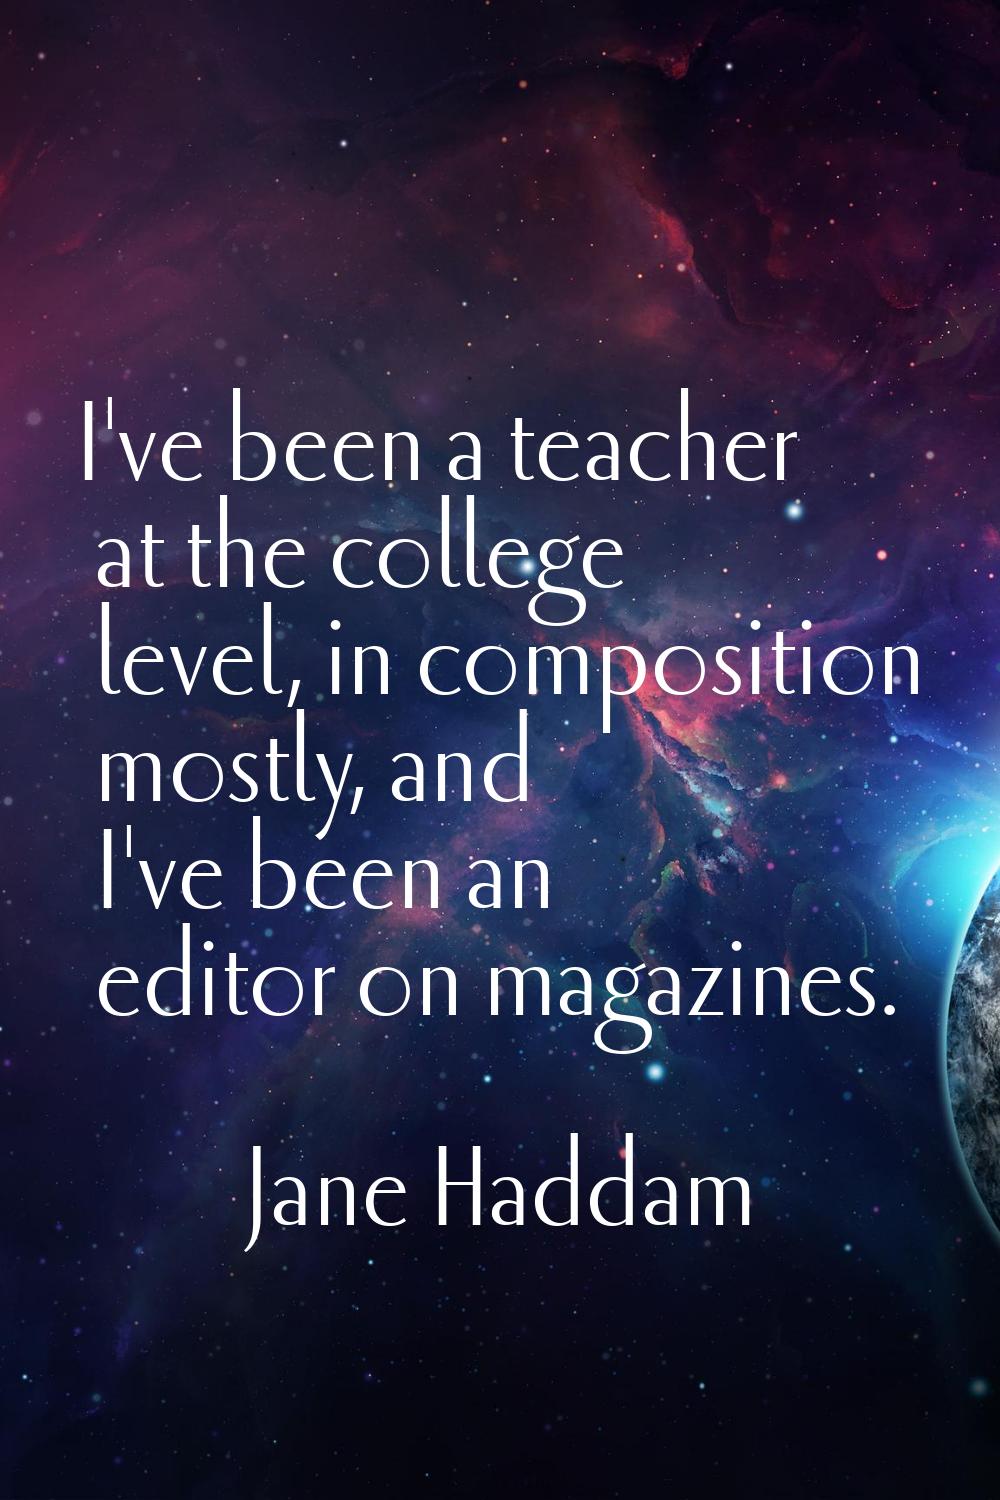 I've been a teacher at the college level, in composition mostly, and I've been an editor on magazin